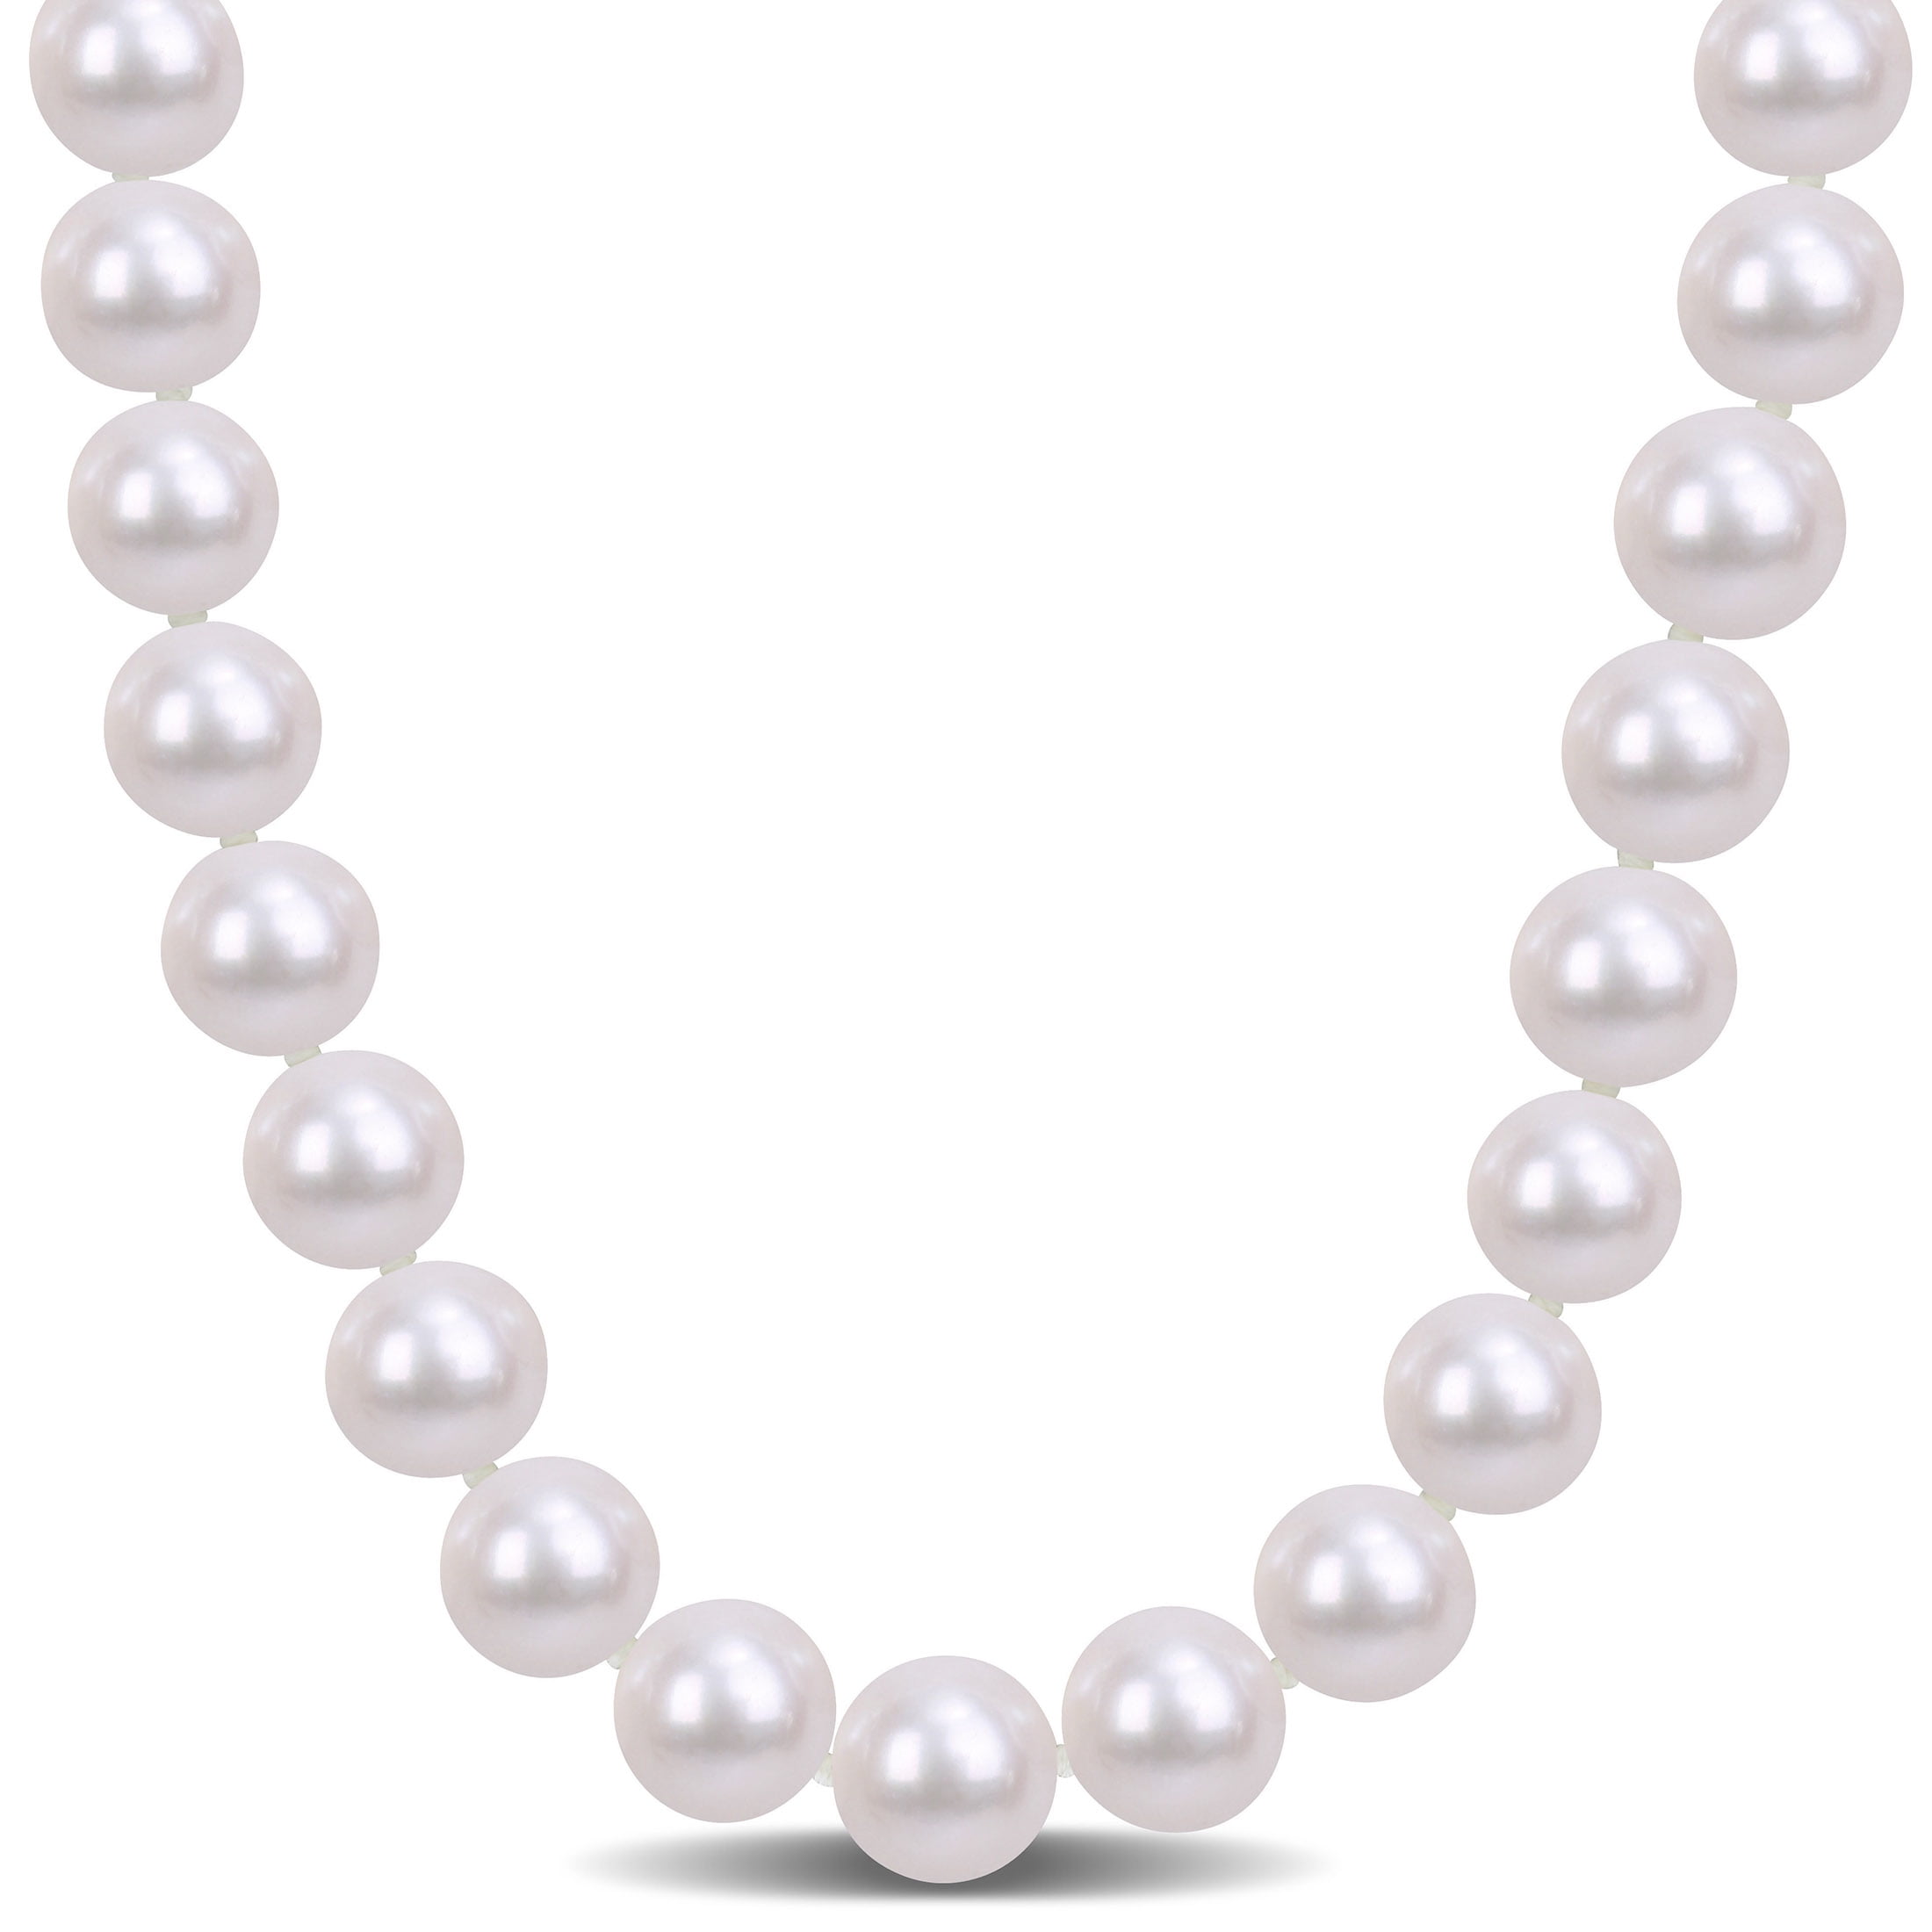 Sterling Silver 6mm 30 Inch Pearls Bead Necklace.